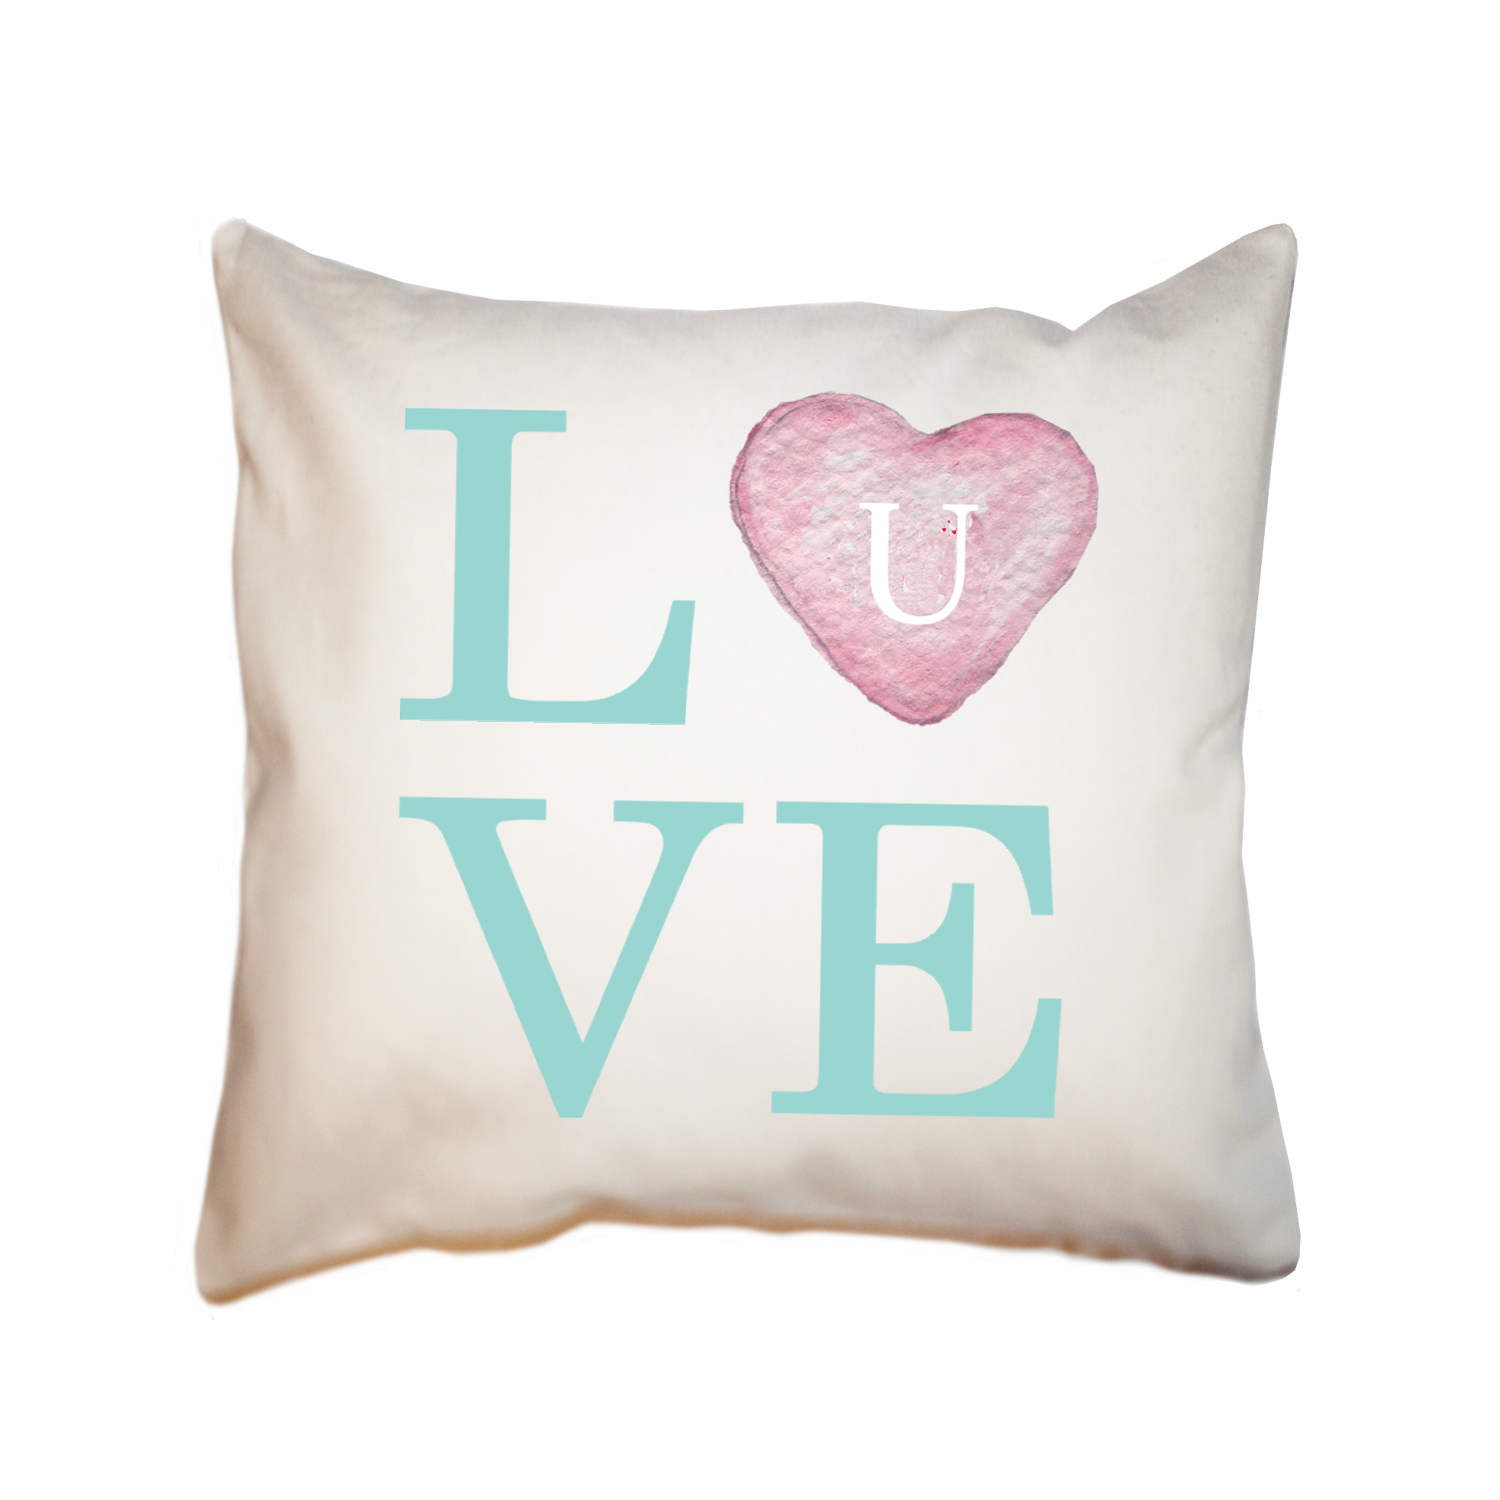 love you square pillow